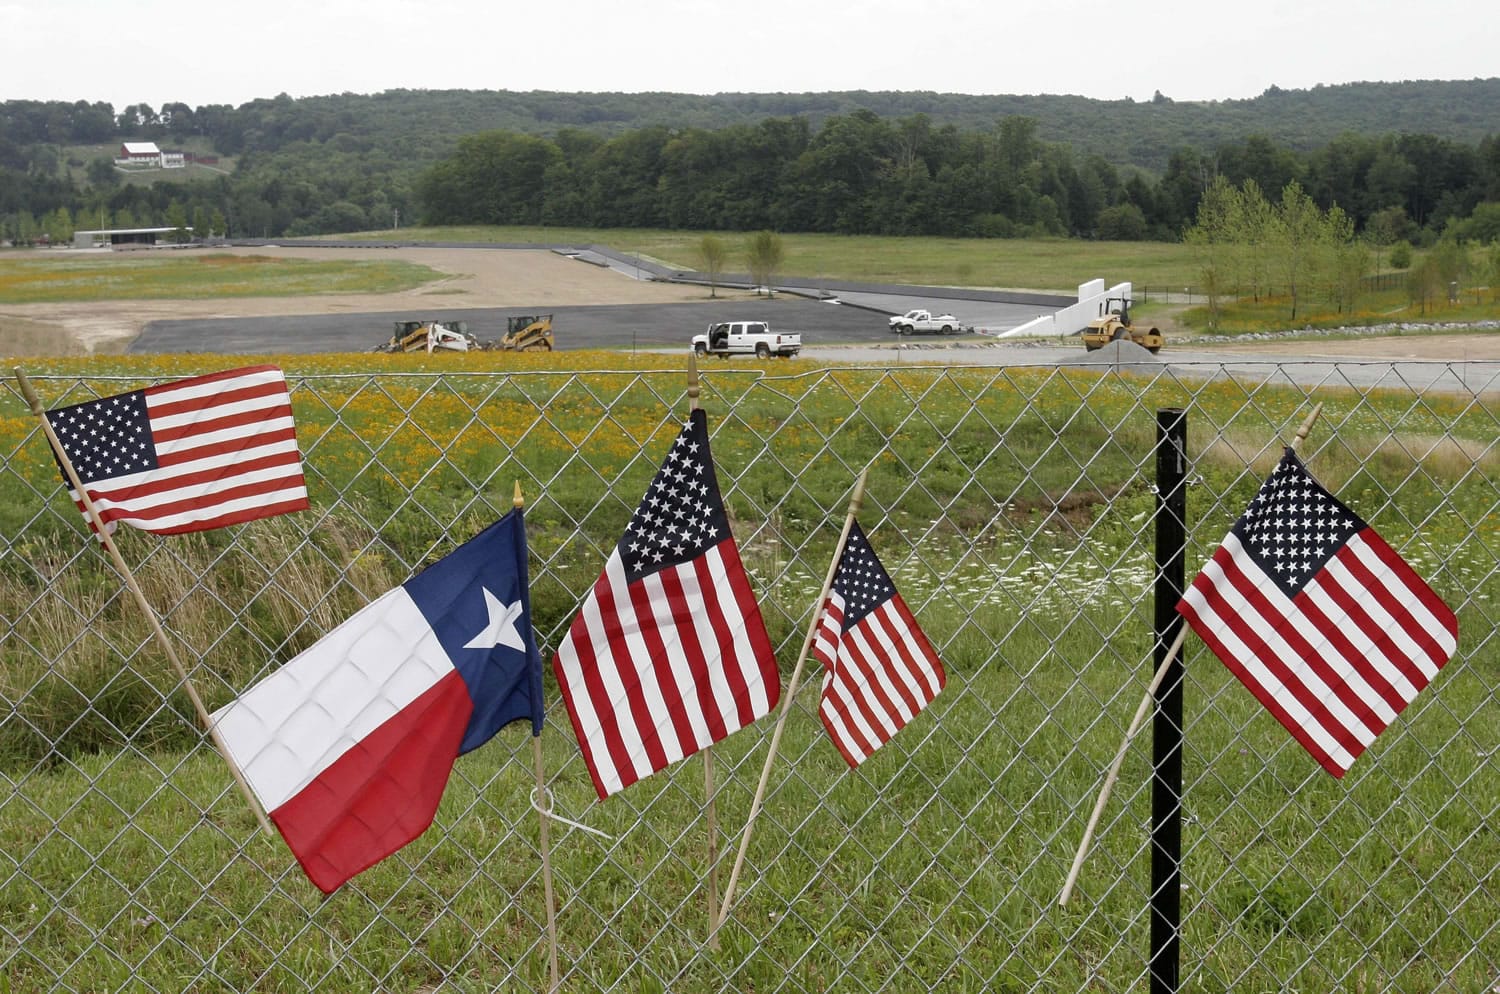 Flags hang on a fence overlooking the crash site of Flight 93 in Shanksville, Pa.